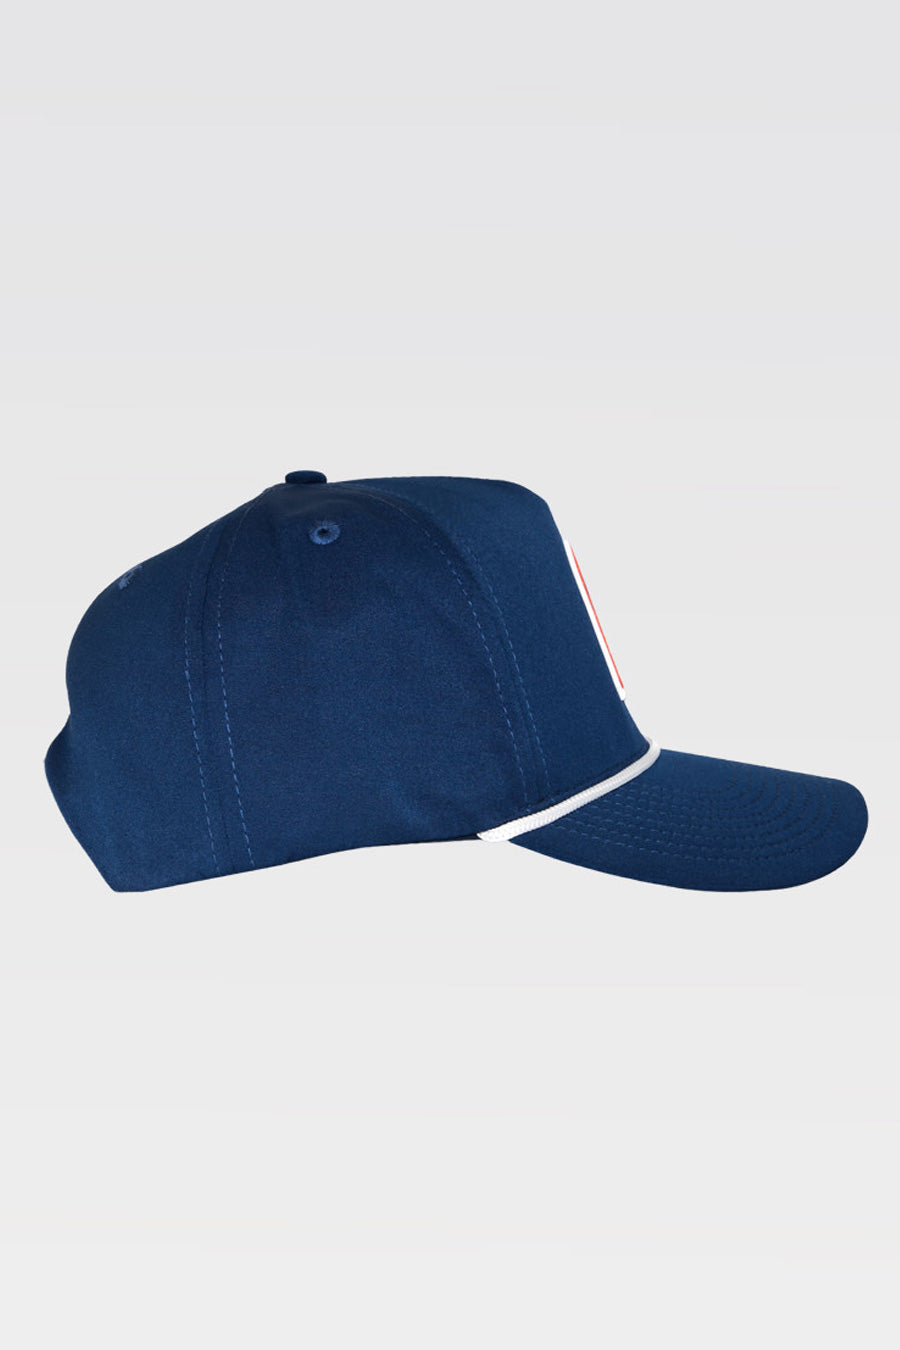 Barbell Range Hat - Navy - photo from side #color_navy